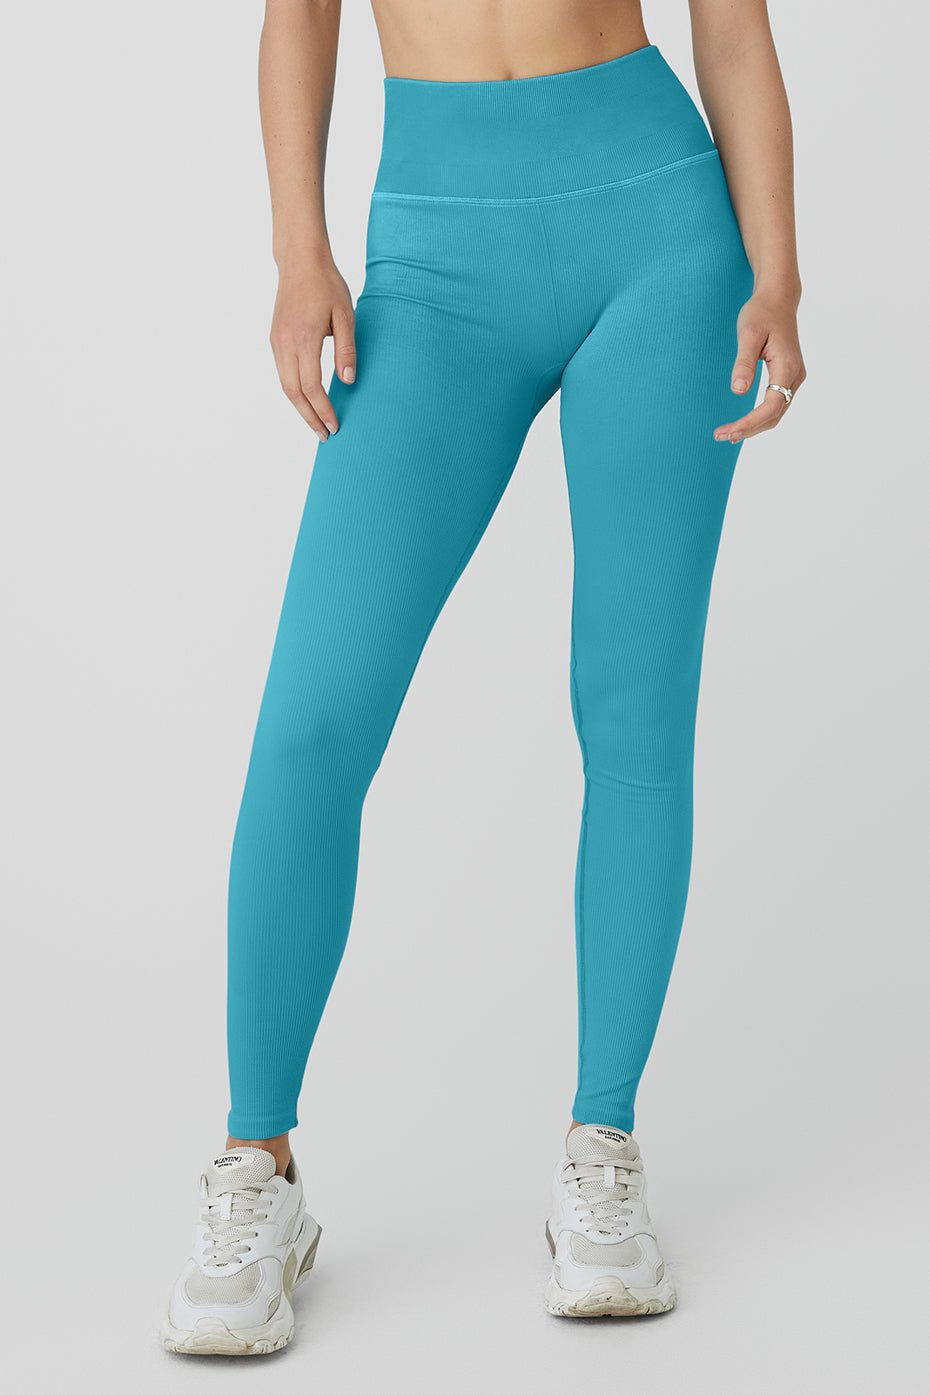 Details more than 80 seamless yoga pants best - in.eteachers